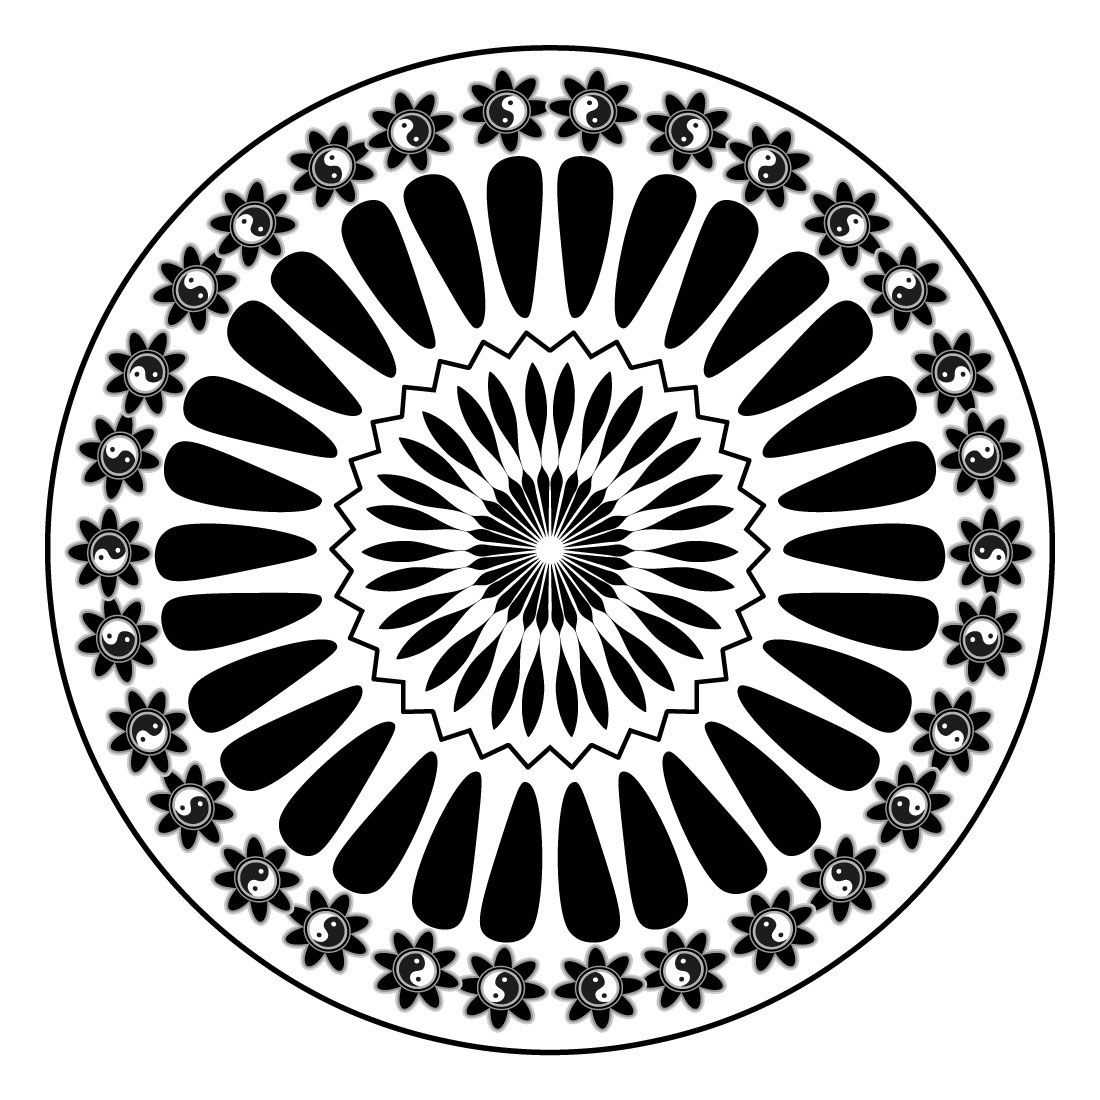 mandala-art-with-fengsui-in-black-and-white cover image.